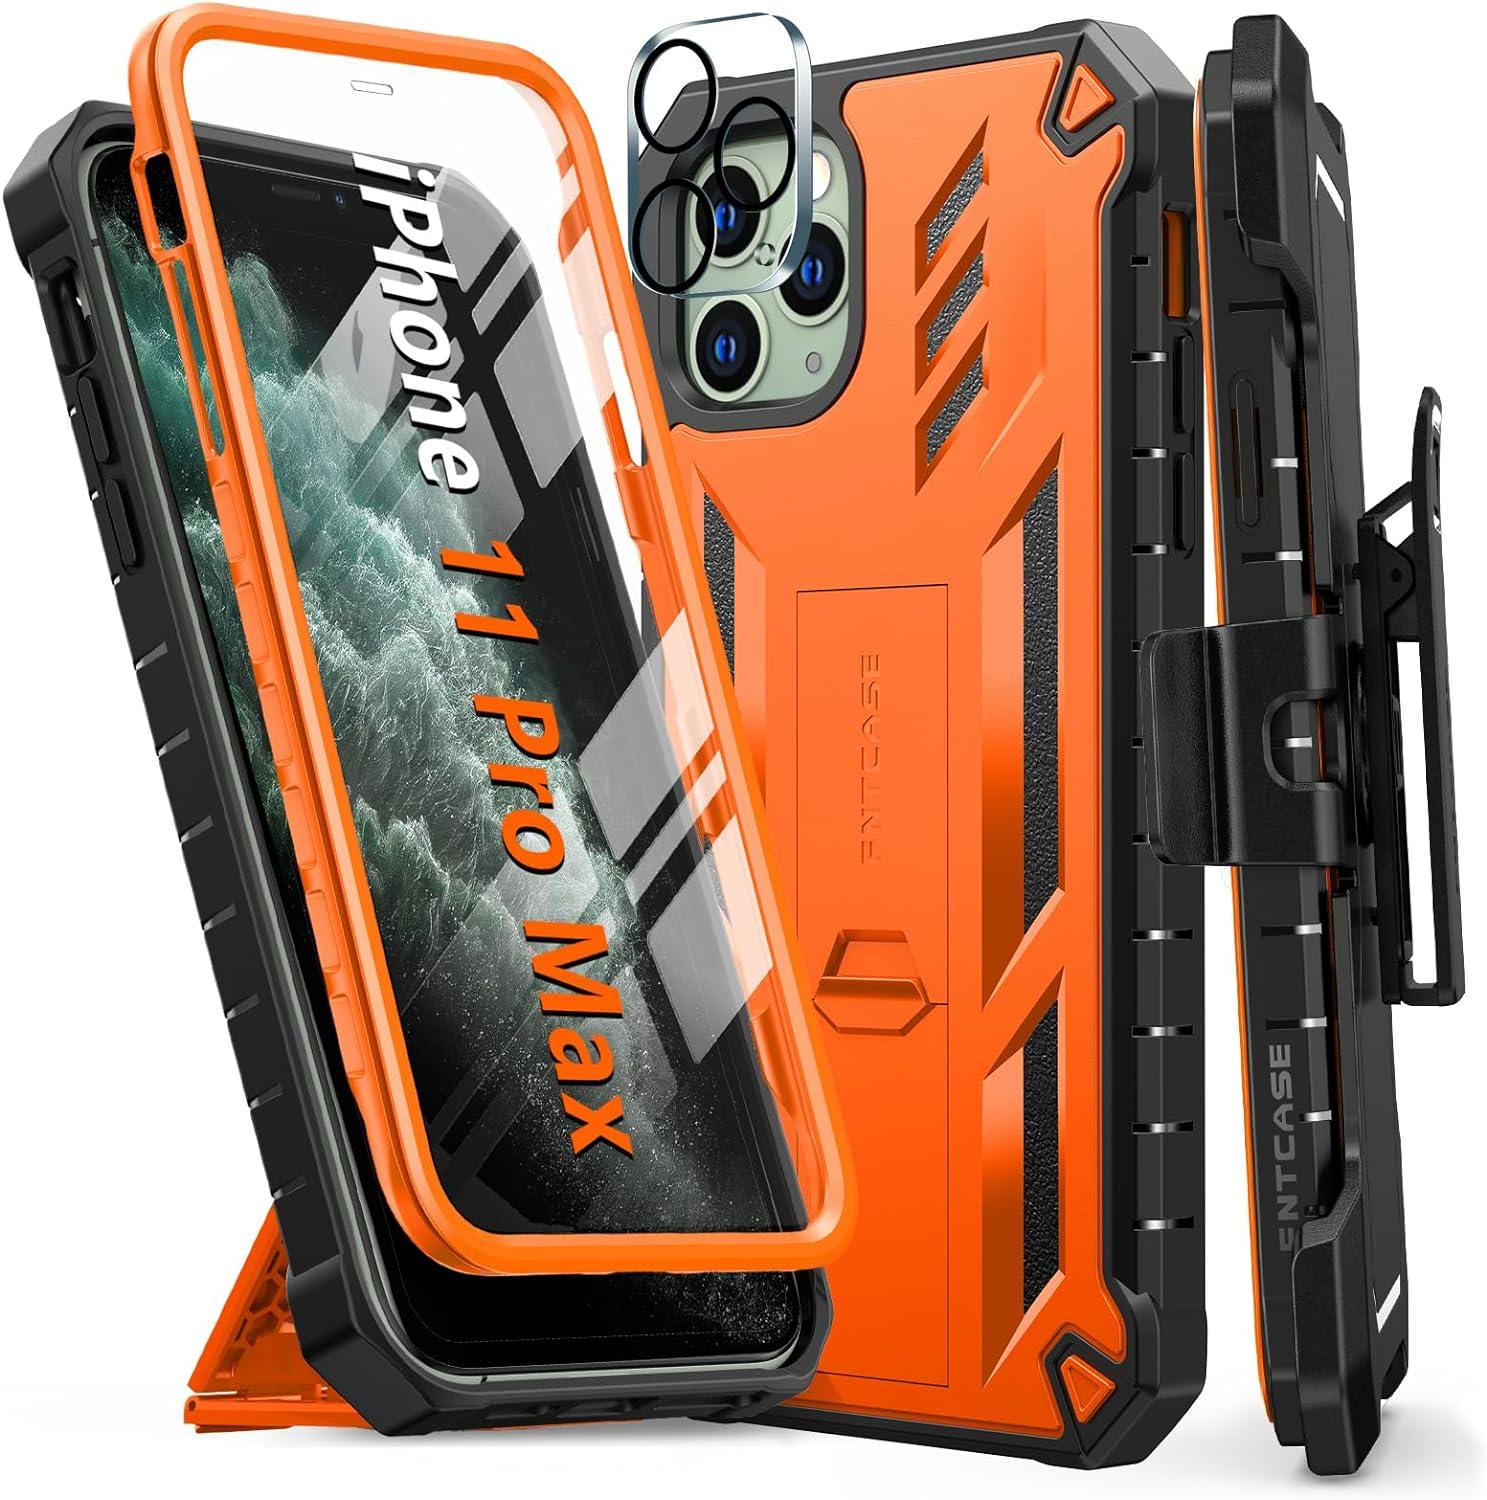 iPhone 11 Pro Max Protective Case with Belt Clip Holster Orange